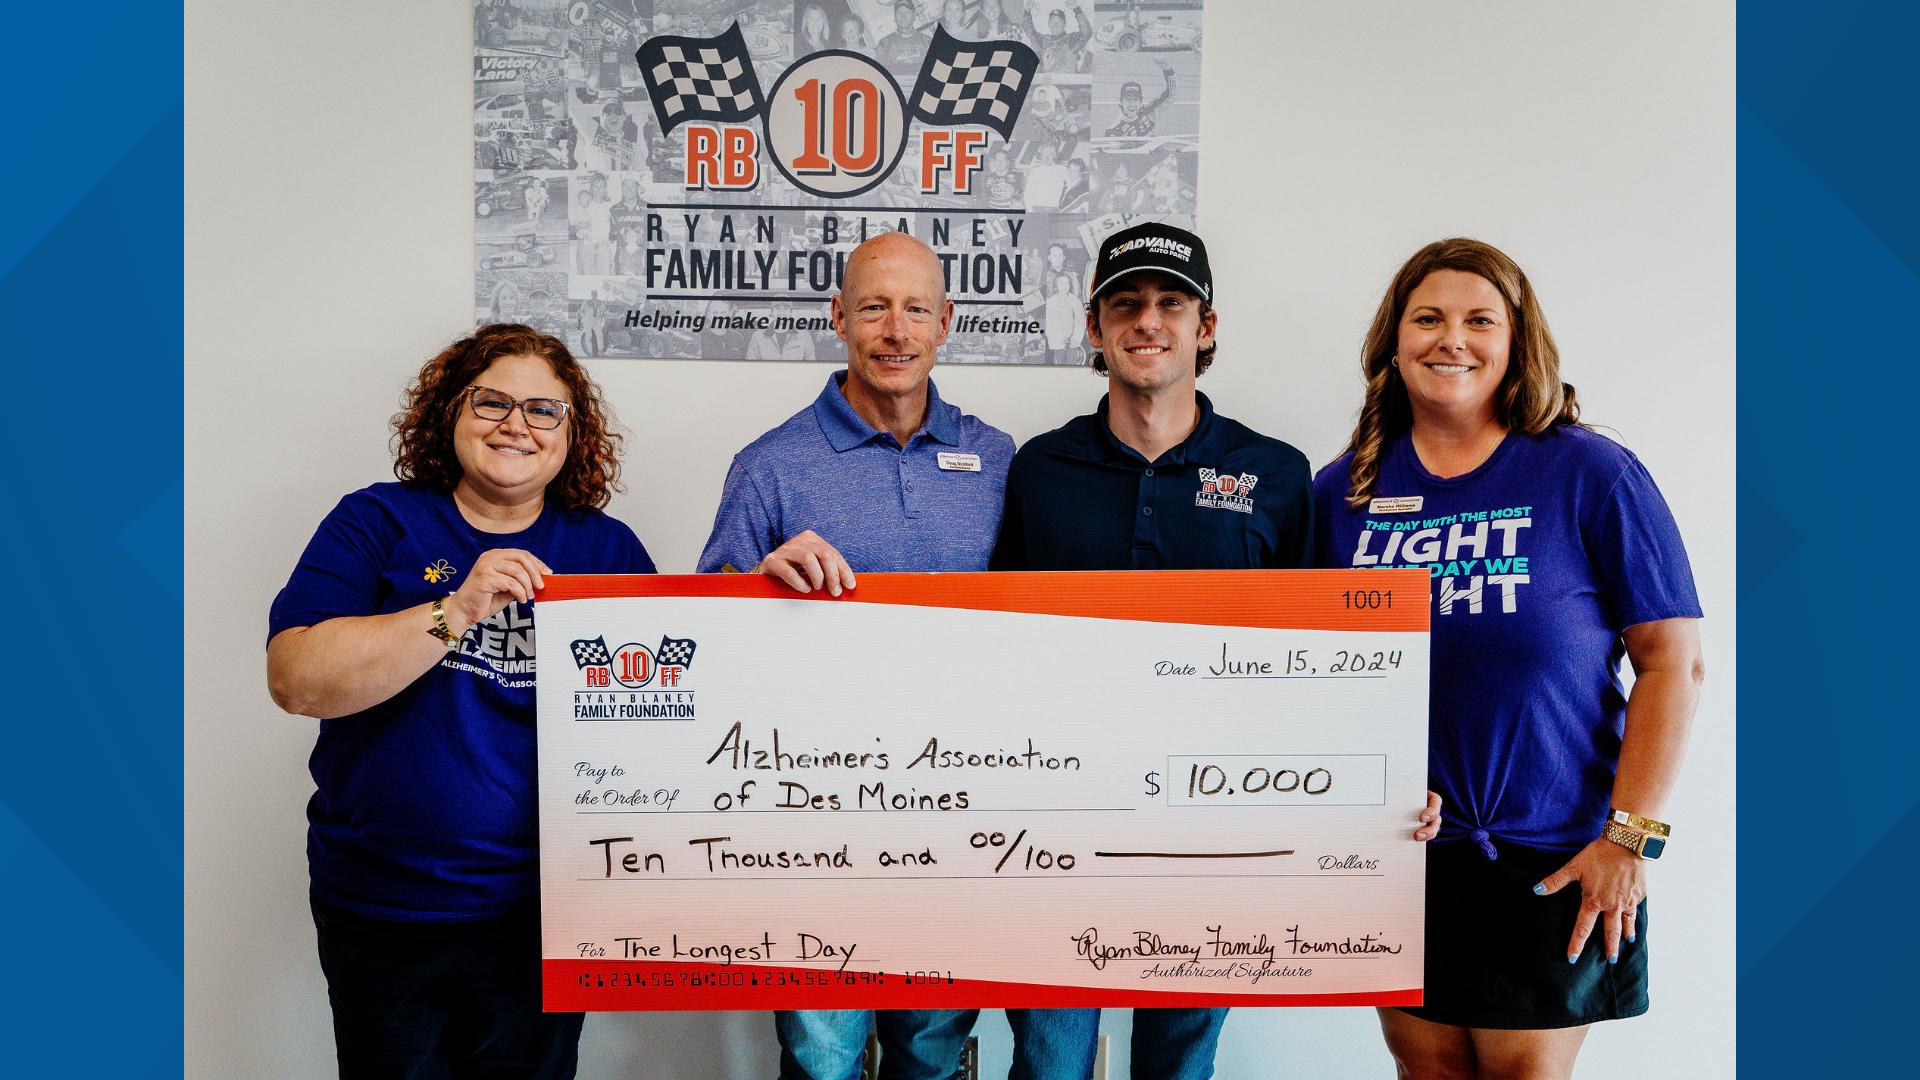 Ryan Blaney made the donation the night before he won Newton's inaugural Cup Series race.